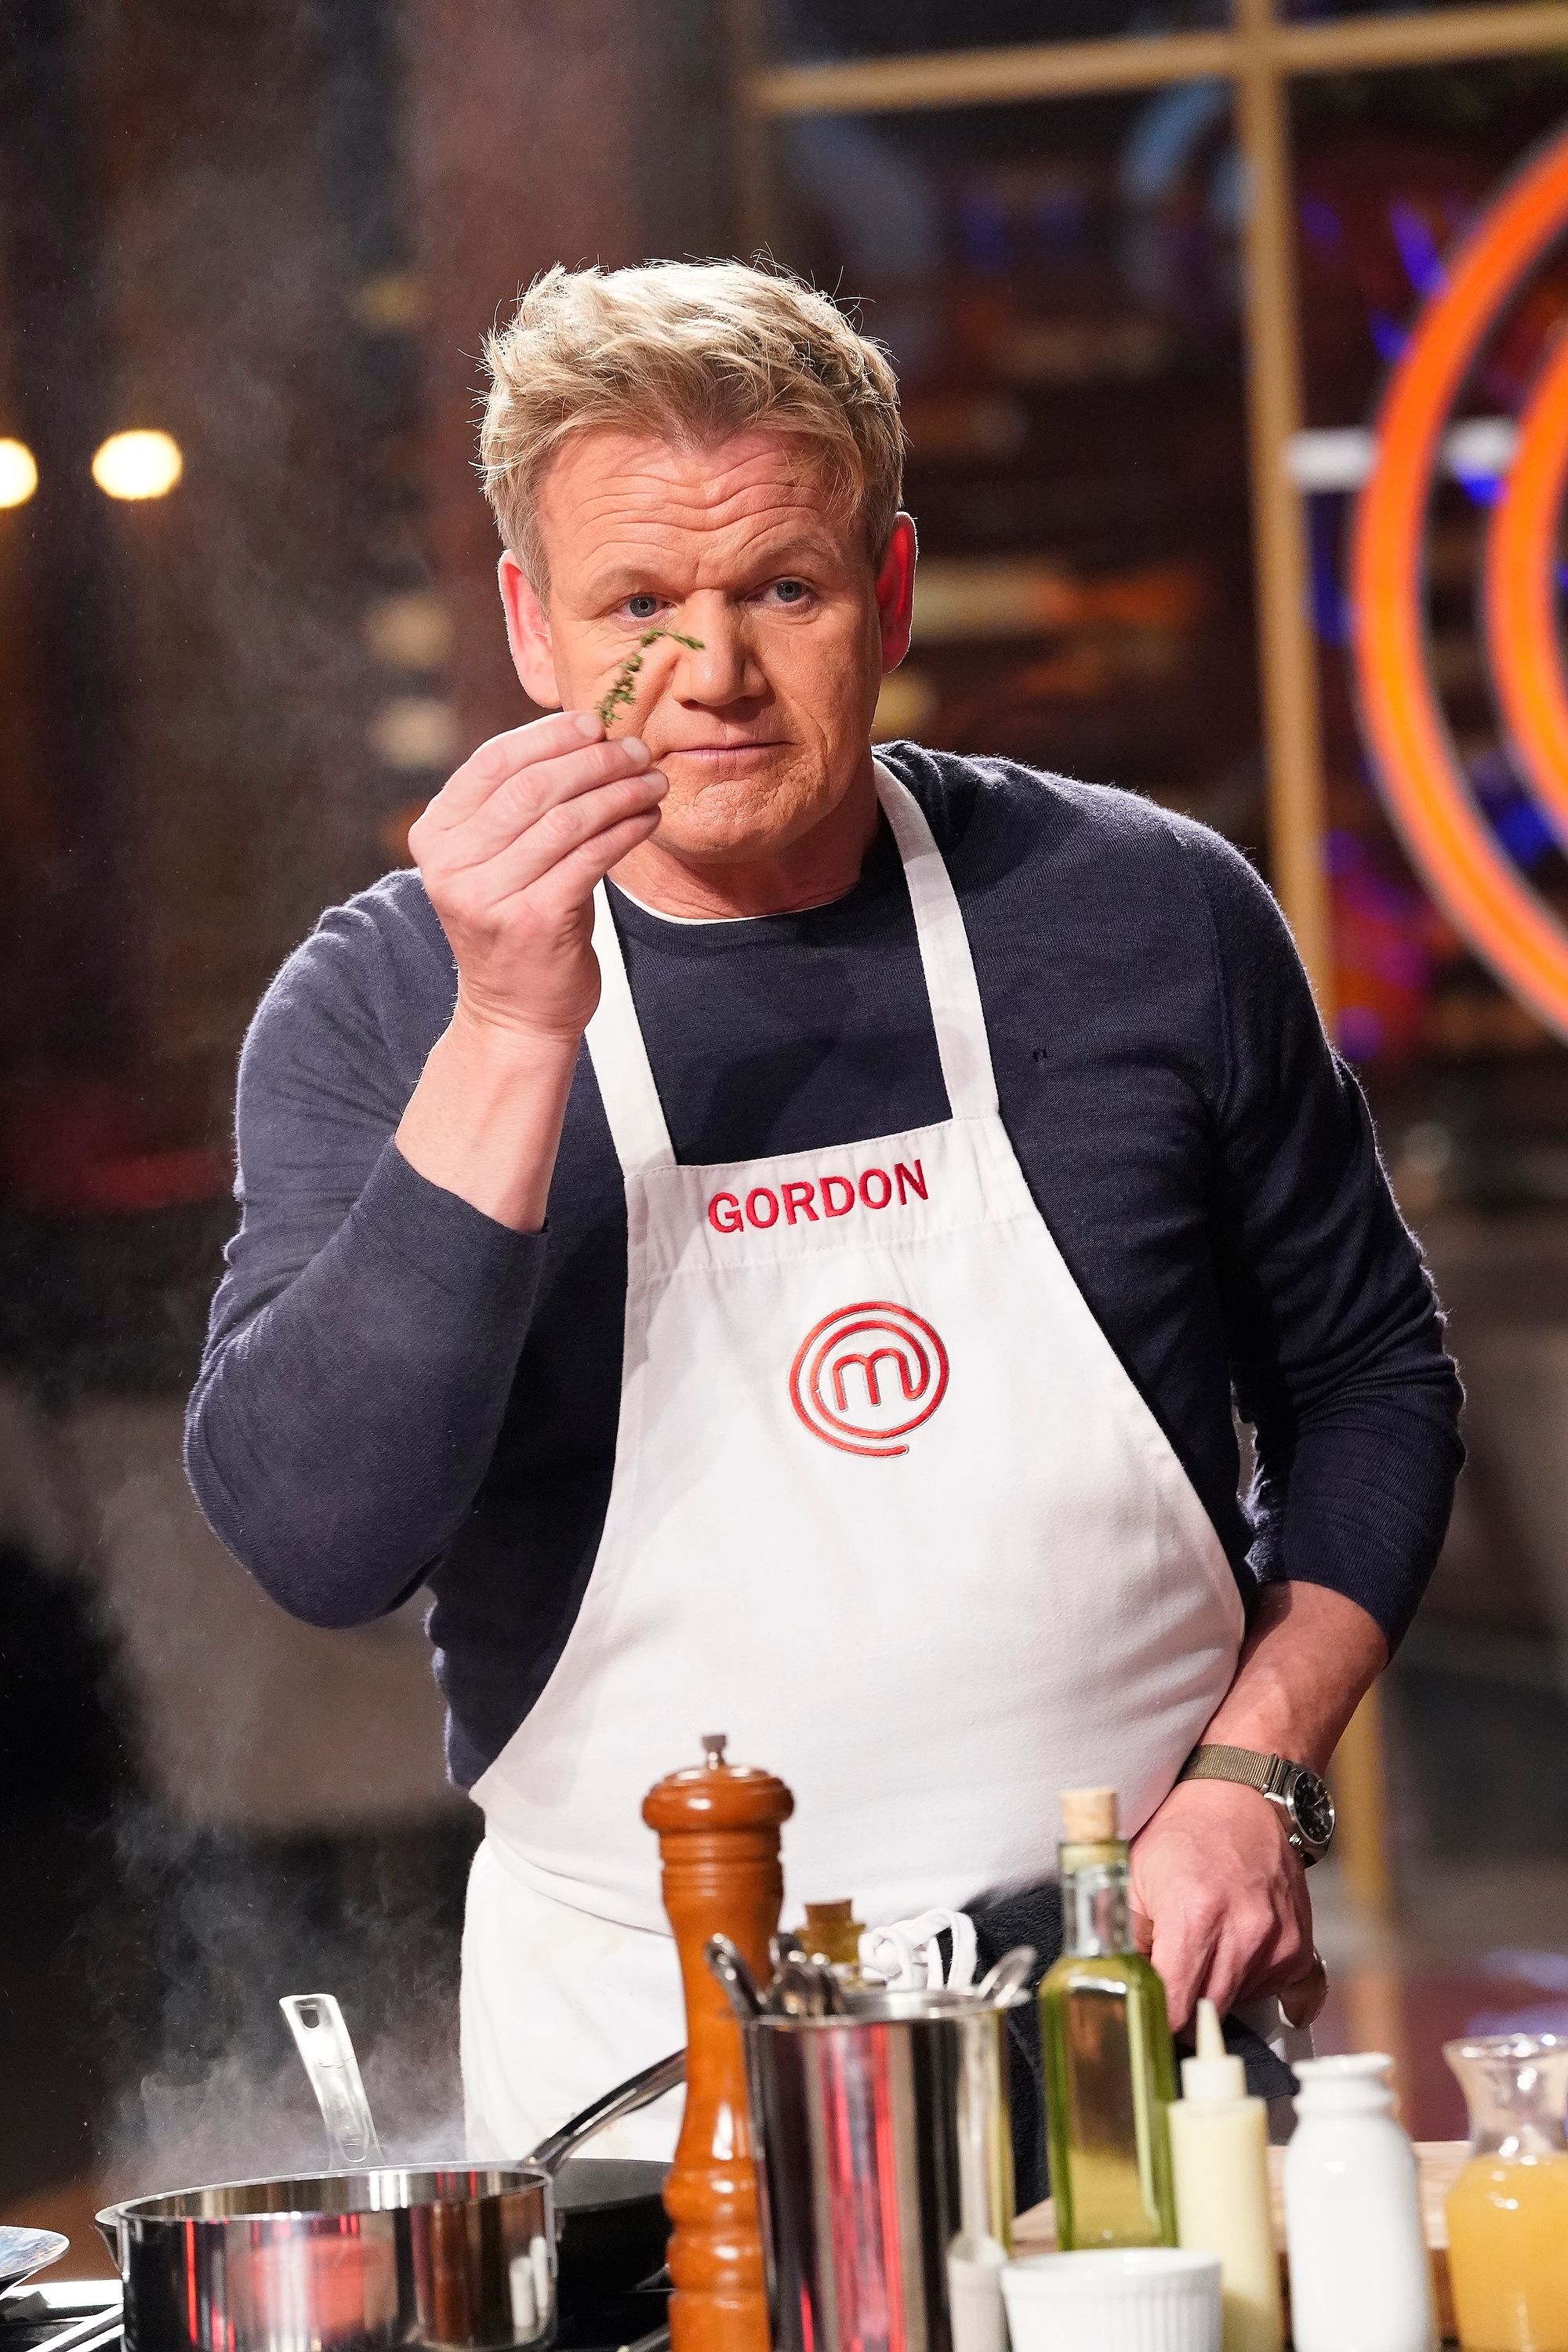 https://hips.hearstapps.com/hmg-prod/images/host-judge-gordon-ramsay-in-the-box-in-a-box-in-a-box-news-photo-1635262612.jpg